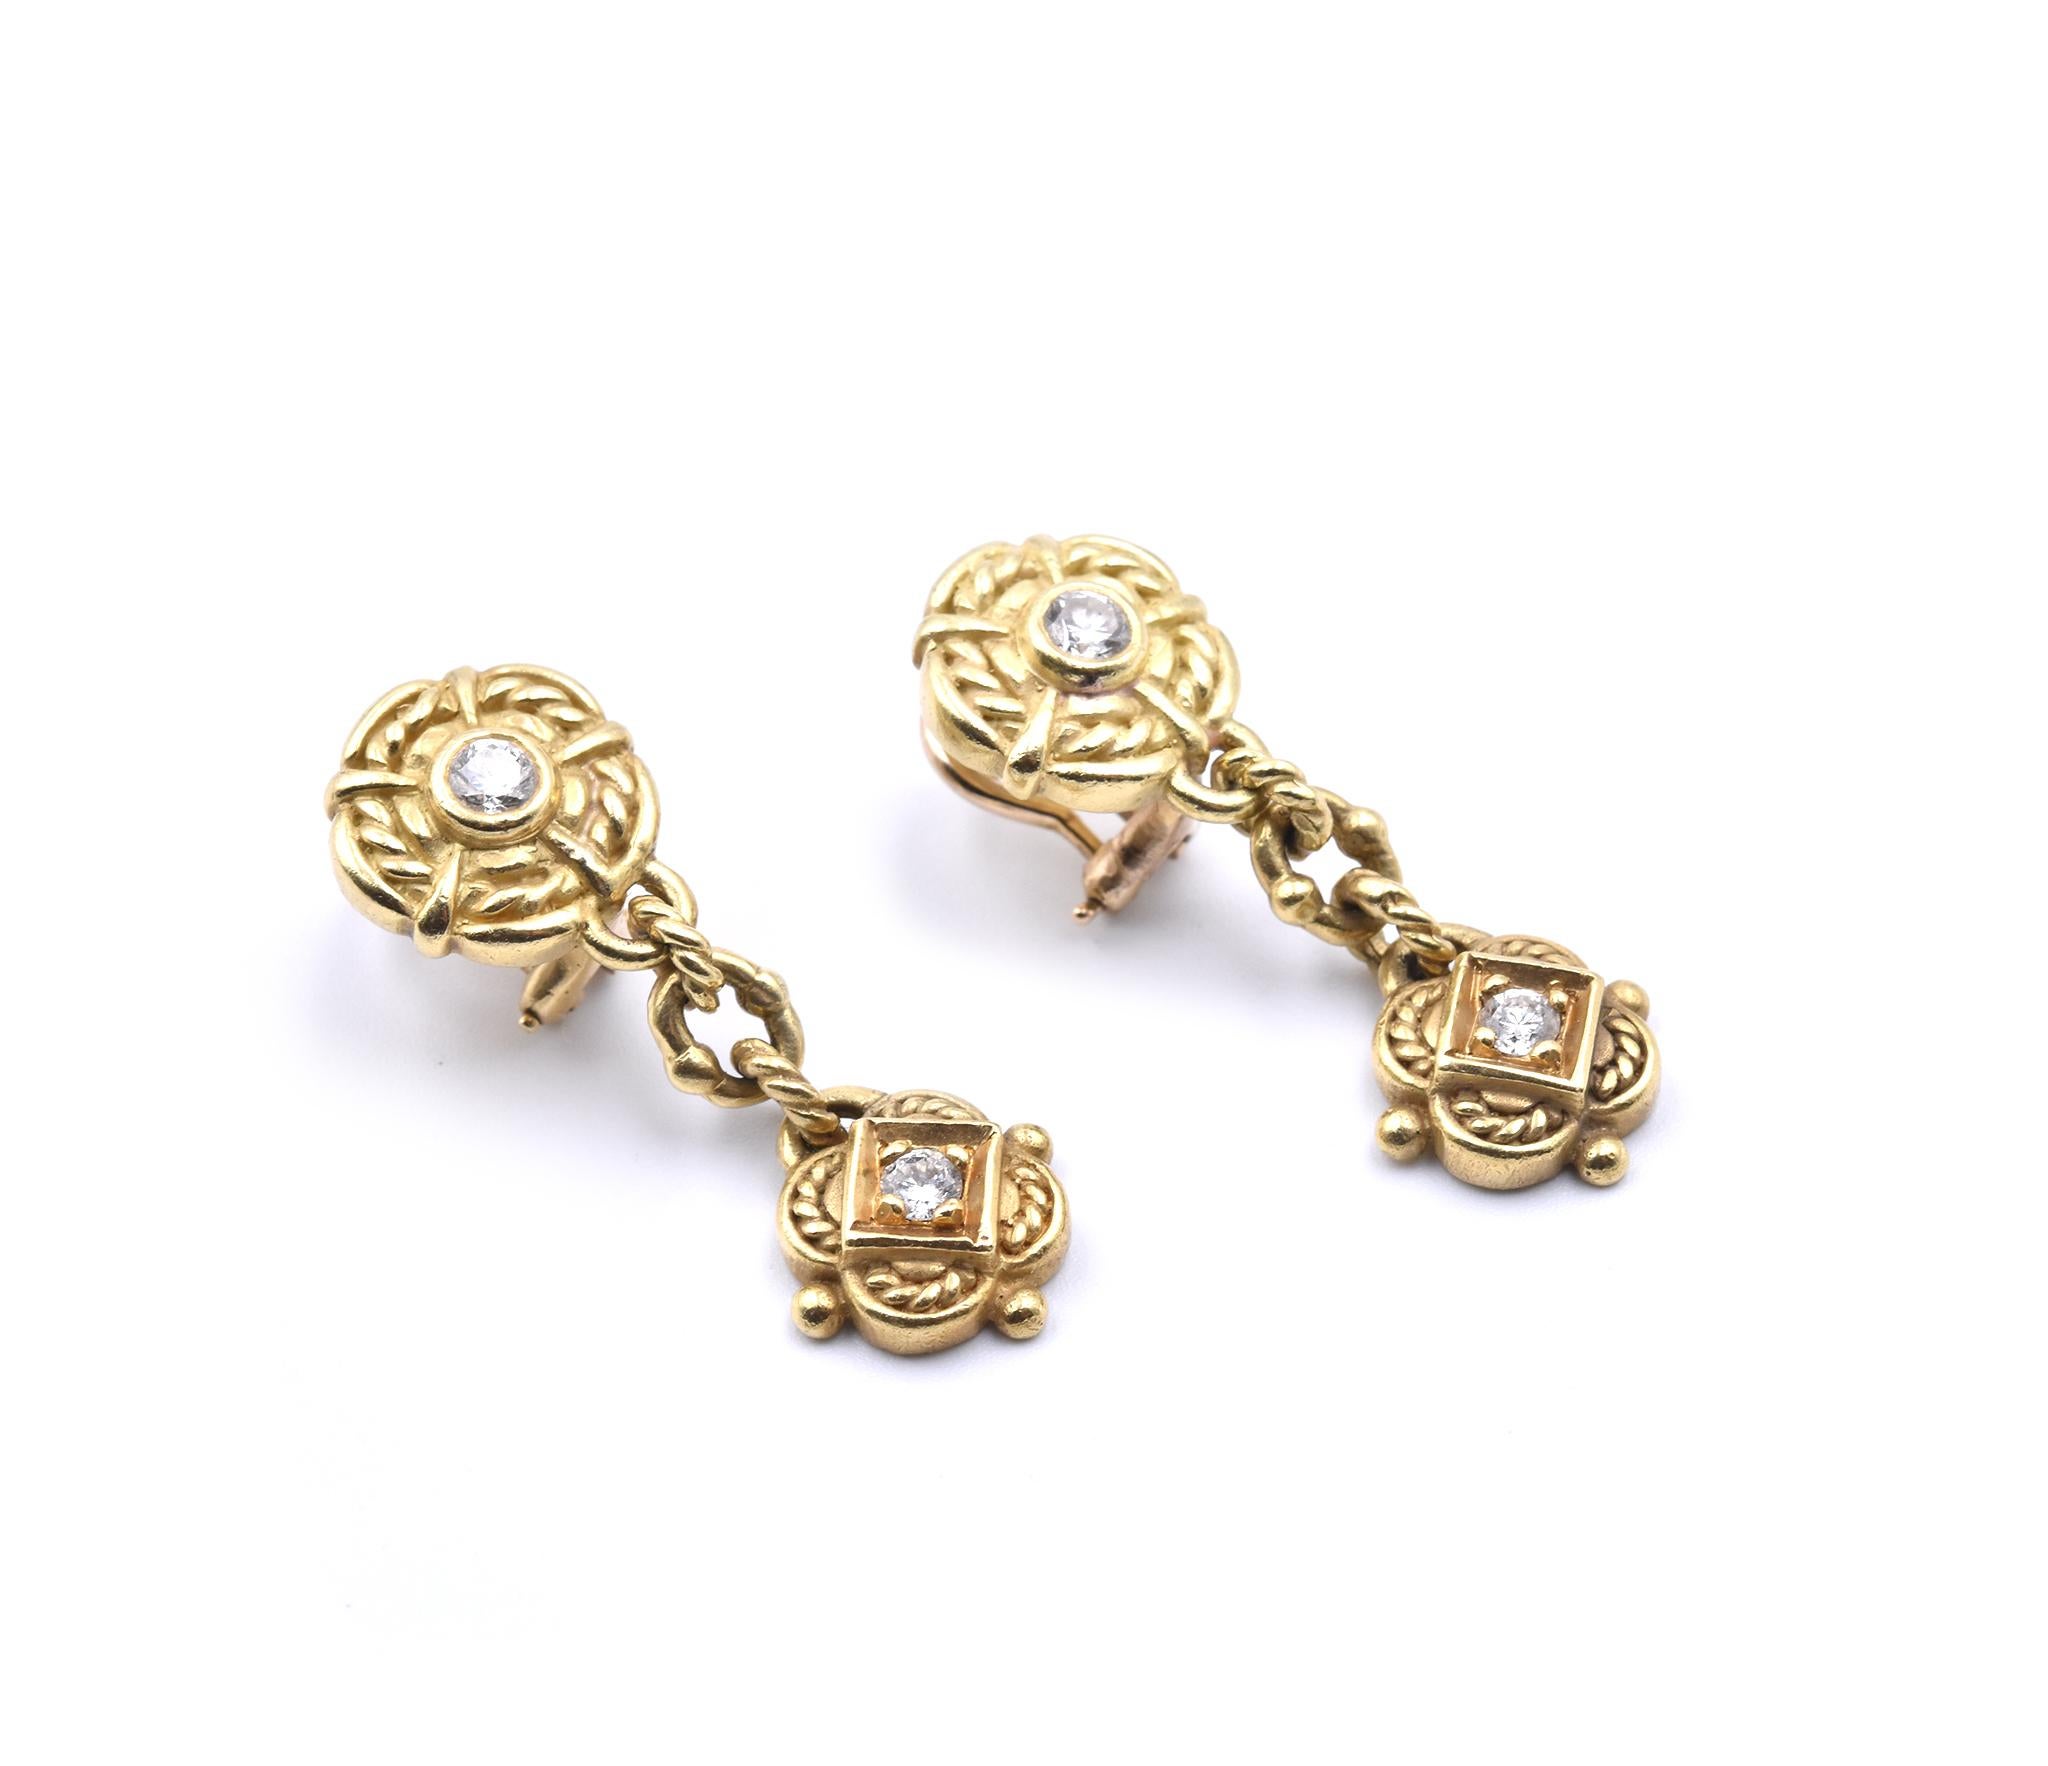 Designer: Judith Ripka
Material: 18k yellow gold
Diamonds: 4 round brilliant cut =0.60cttw
Color: G
Clarity: VS
Dimensions: earrings measure 36.50mm by 12.48mm 
Fastenings: post with omega backs
Weight: 15.7 grams
